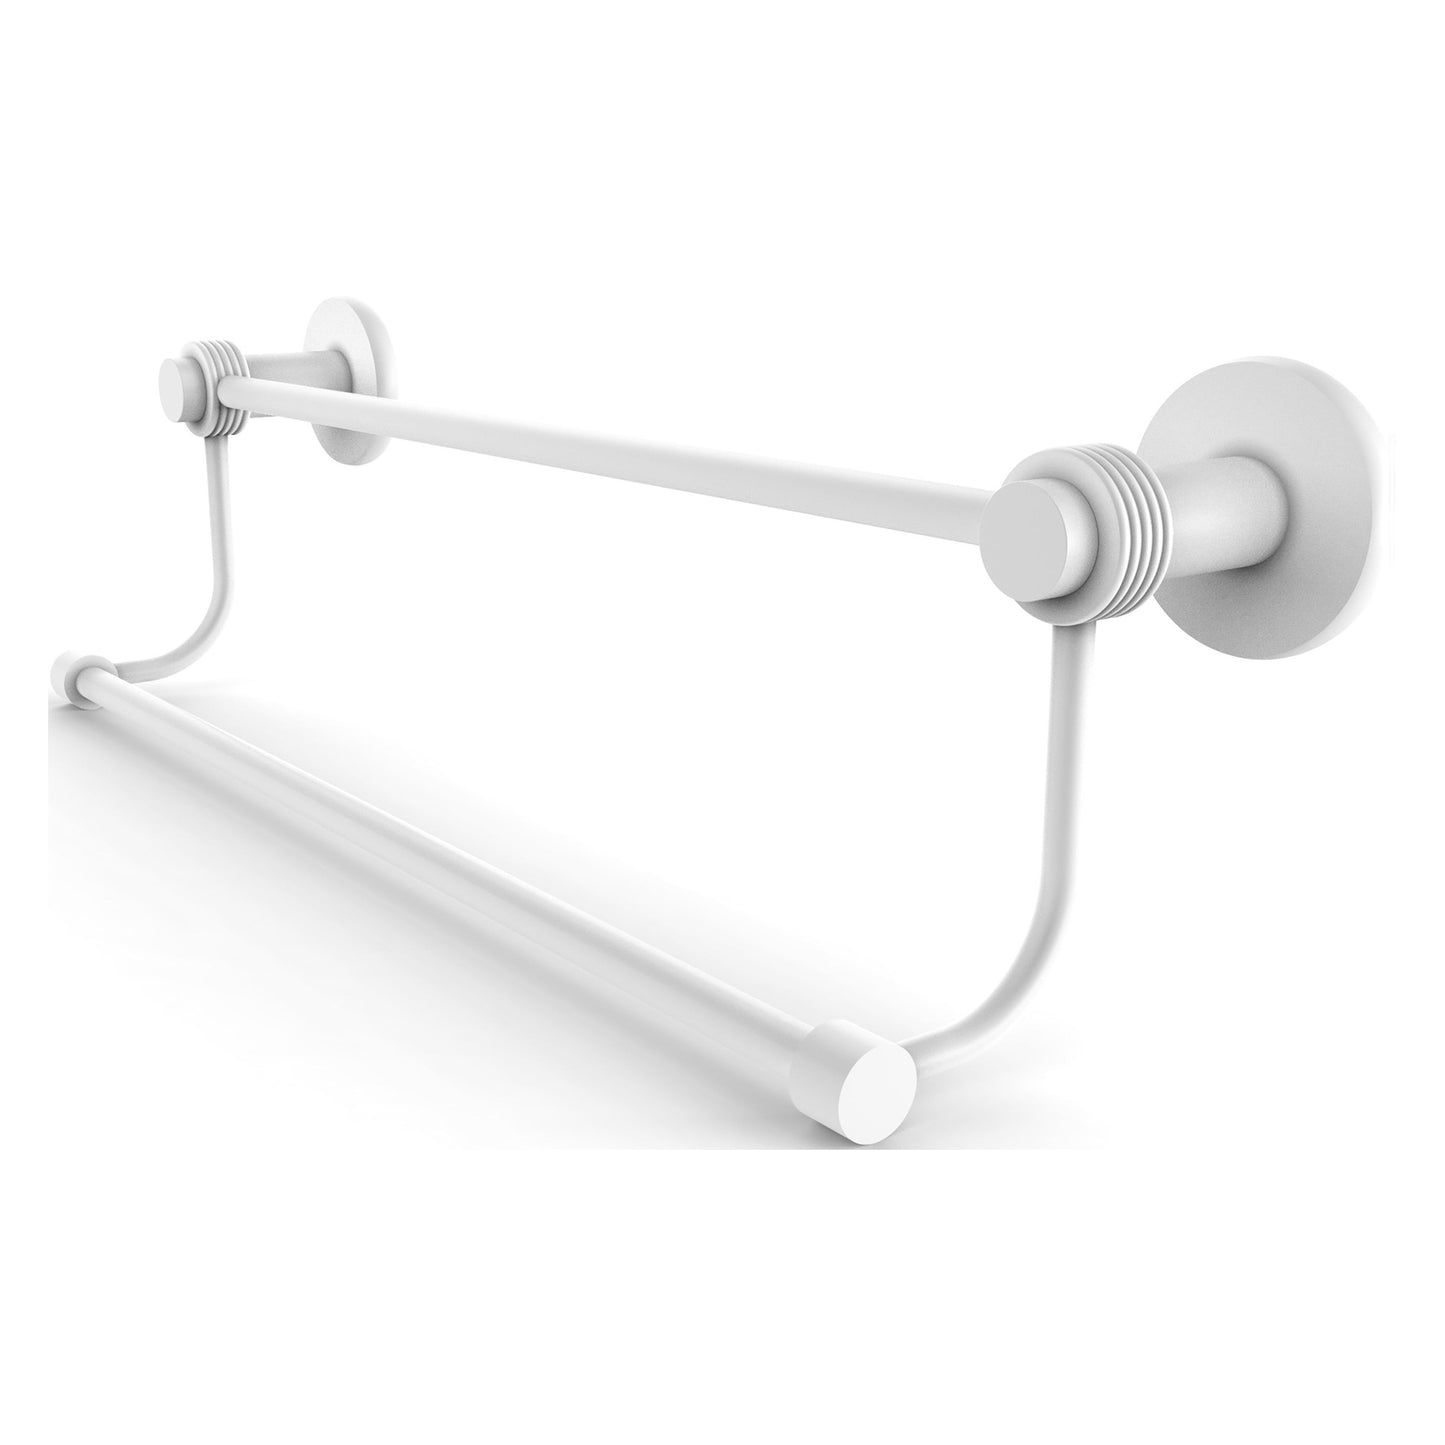 Allied Brass Mercury 24" x 26.5" Matte White Solid Brass Double Towel Bar With Grooved Accents